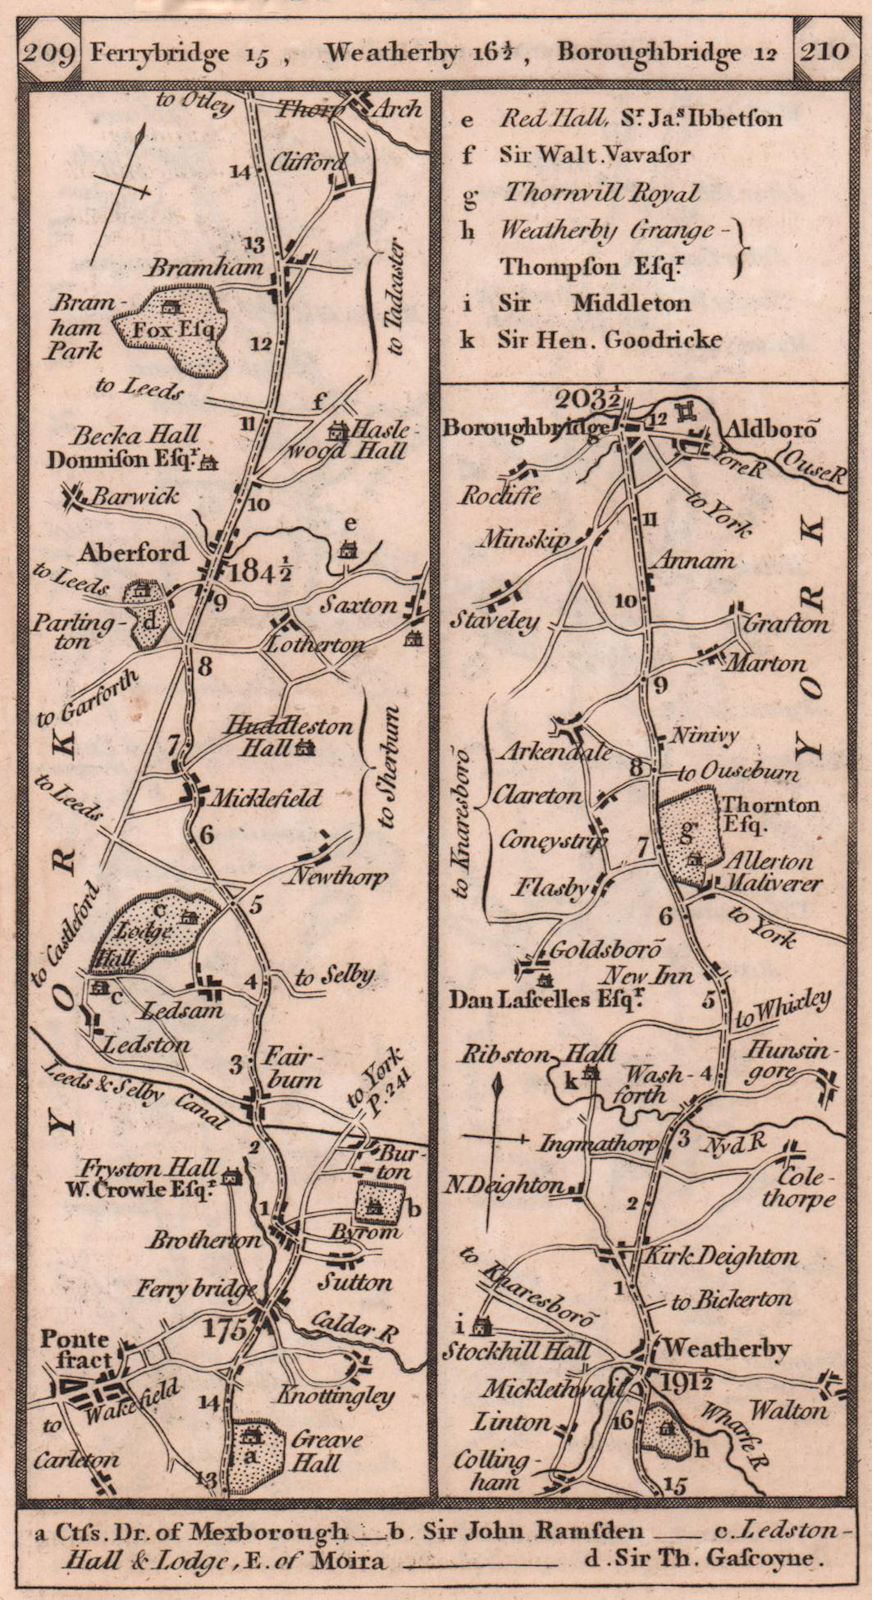 Pontefract-Aberford-Wetherby-Boroughbridge road strip map PATERSON 1803